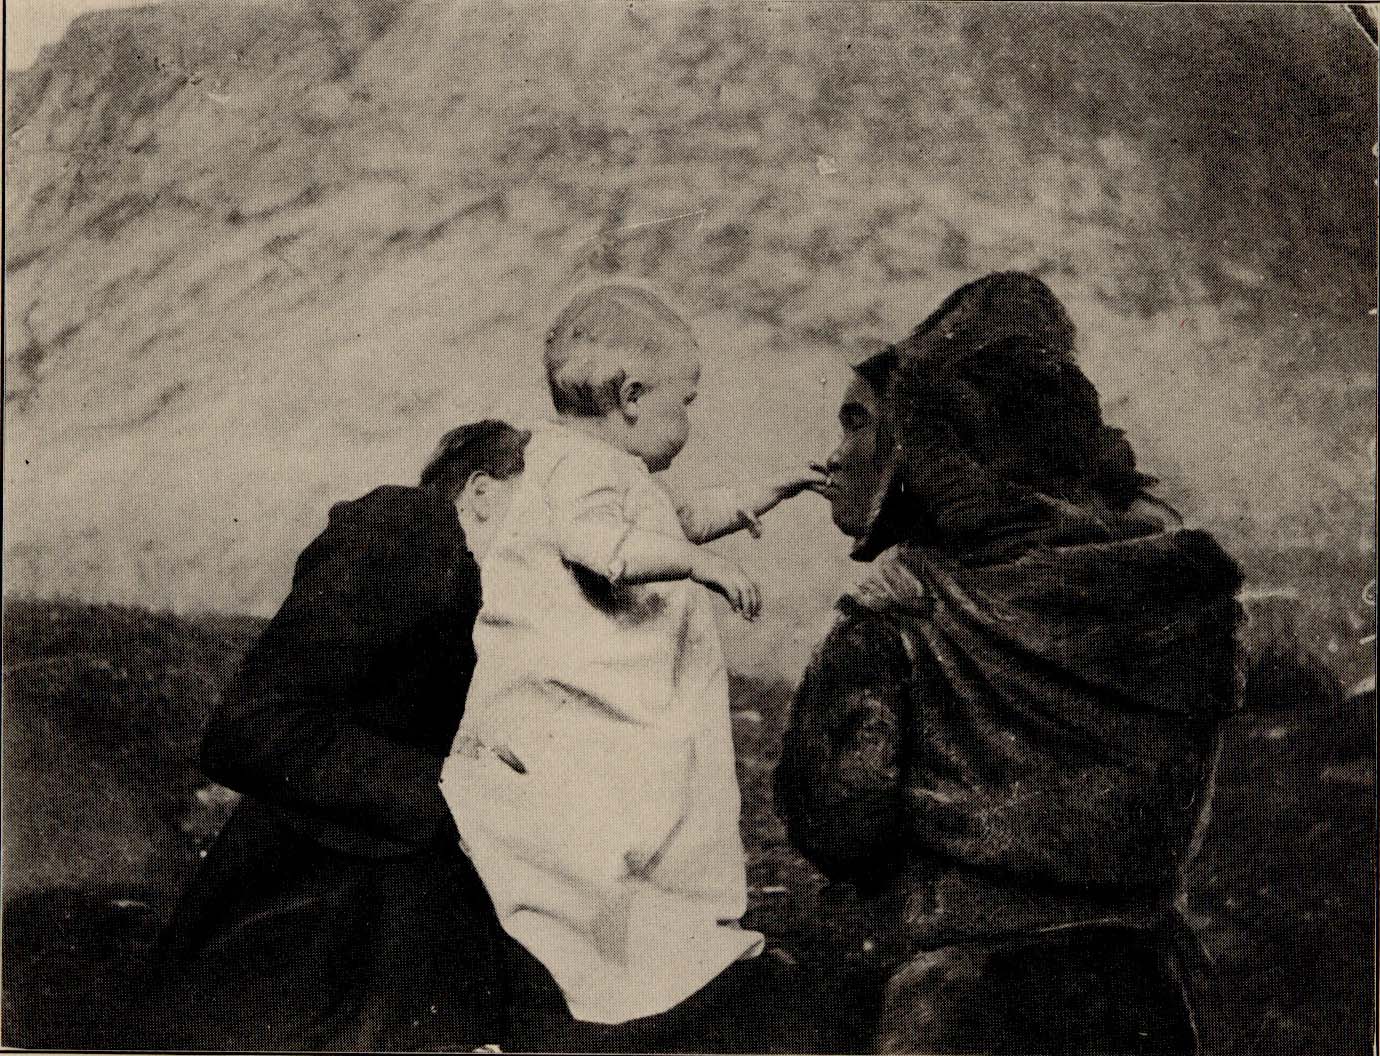 Woman holding baby, whose hand is being kissed by another woman.